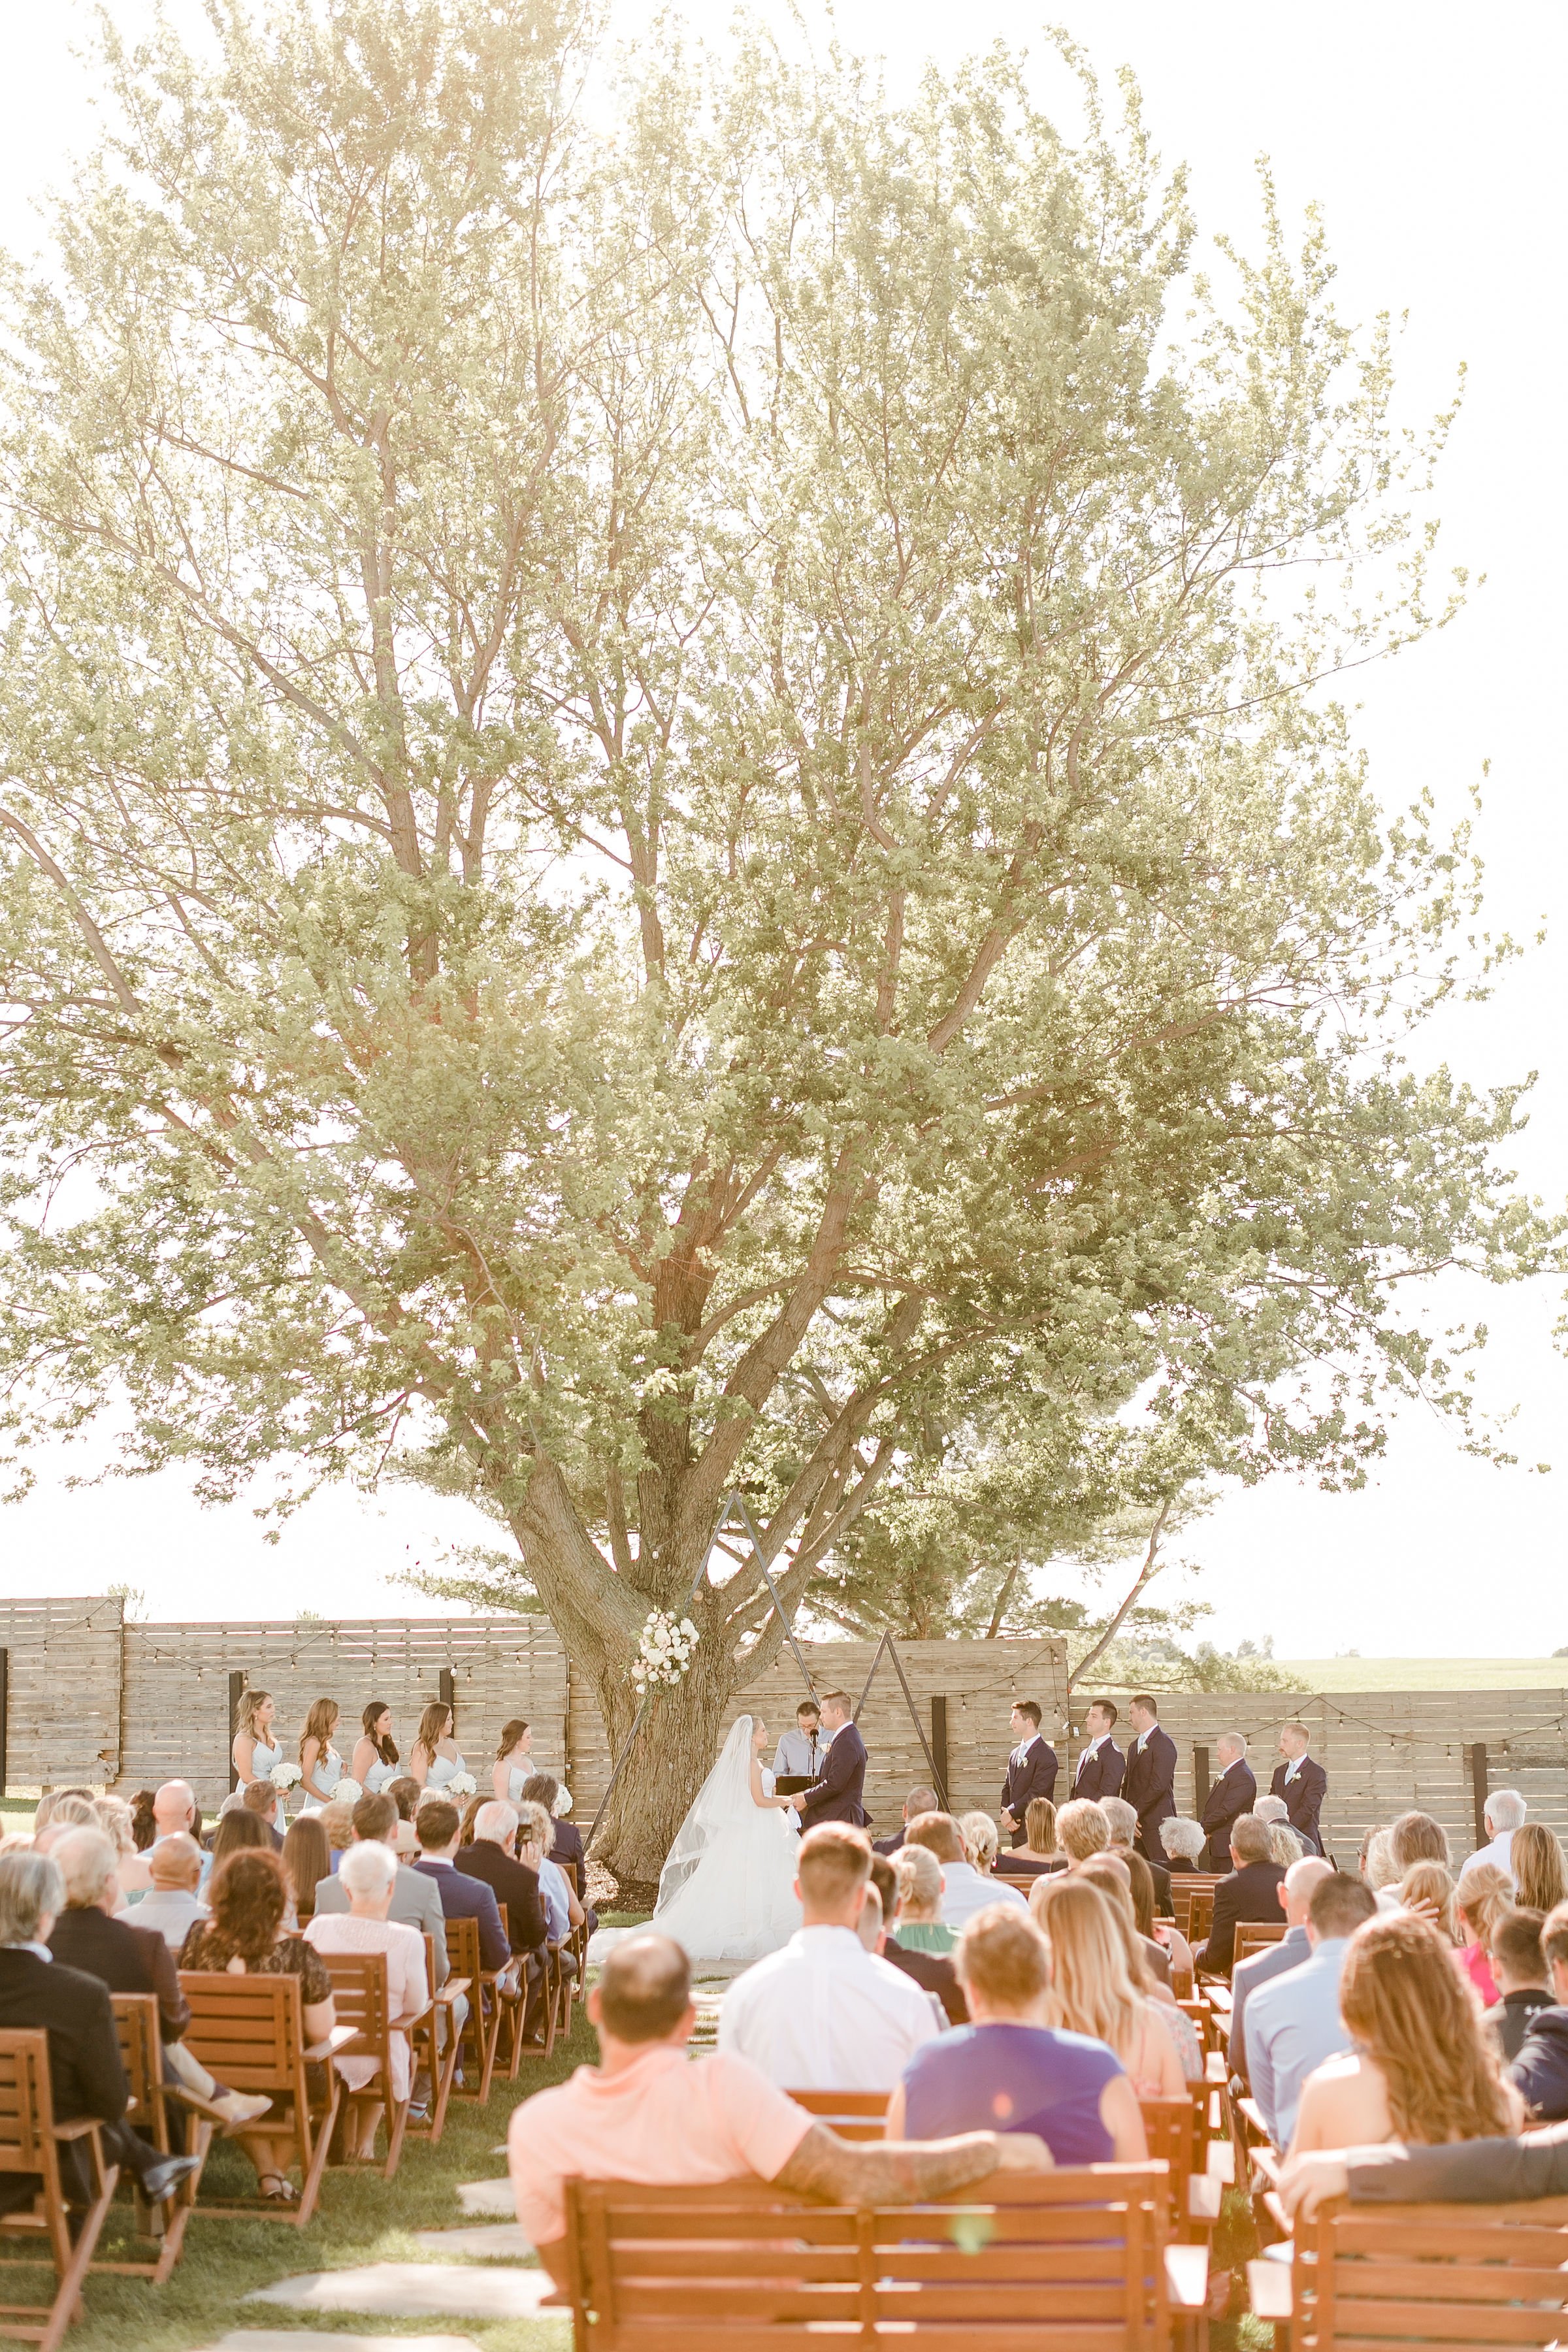 An Indoor-Outdoor Midwest Wedding Venue — Little Lights on the Lane